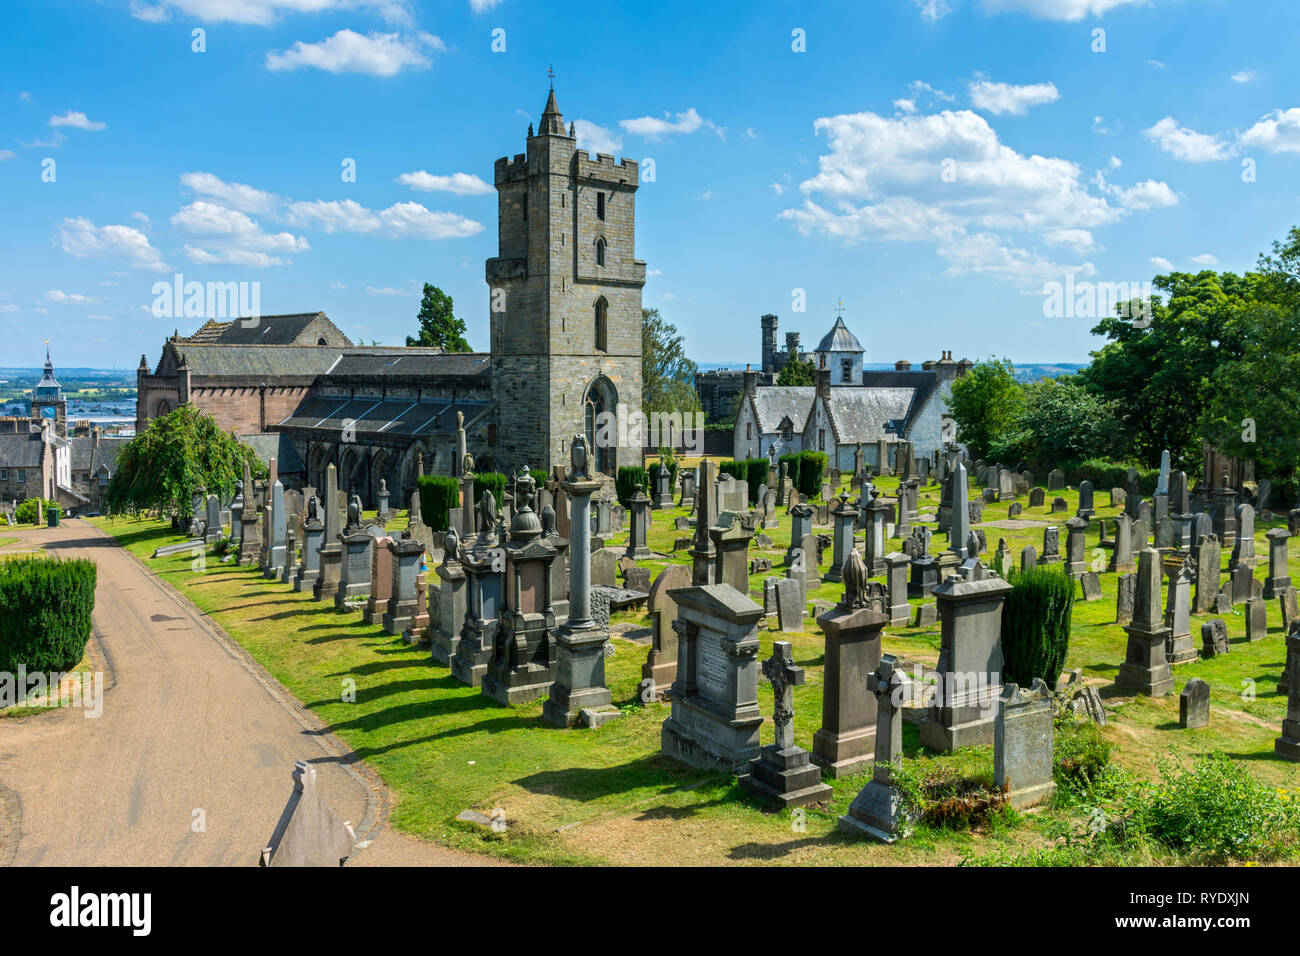 The Church of the Holy Rude over the Old Town Cemetery, Stirling, Stirlingshire, Scotland, UK Stock Photo